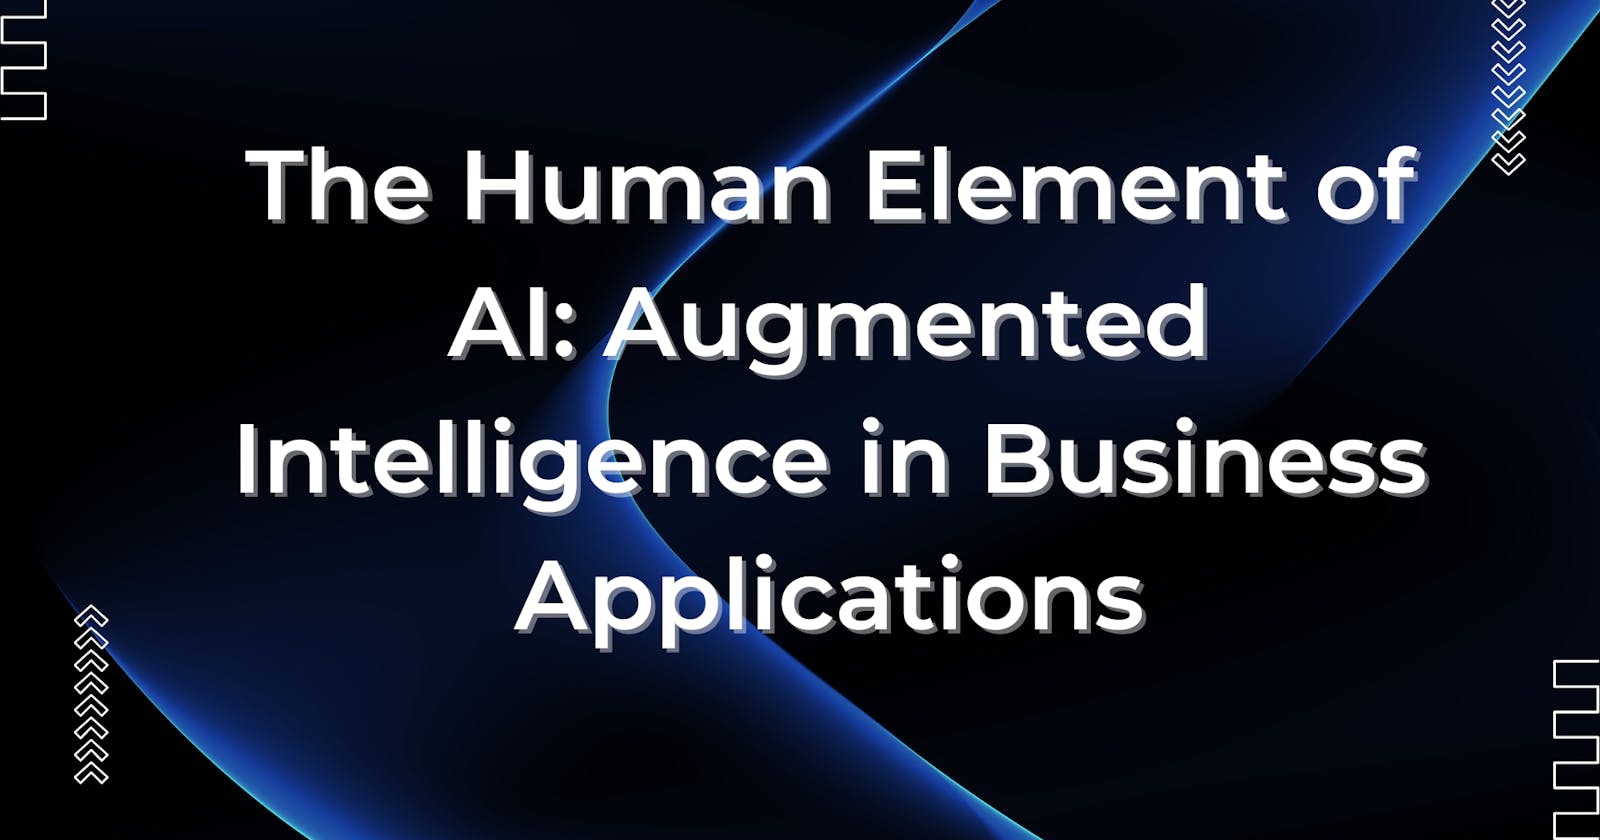 The Human Element of AI: Augmented Intelligence in Business Applications